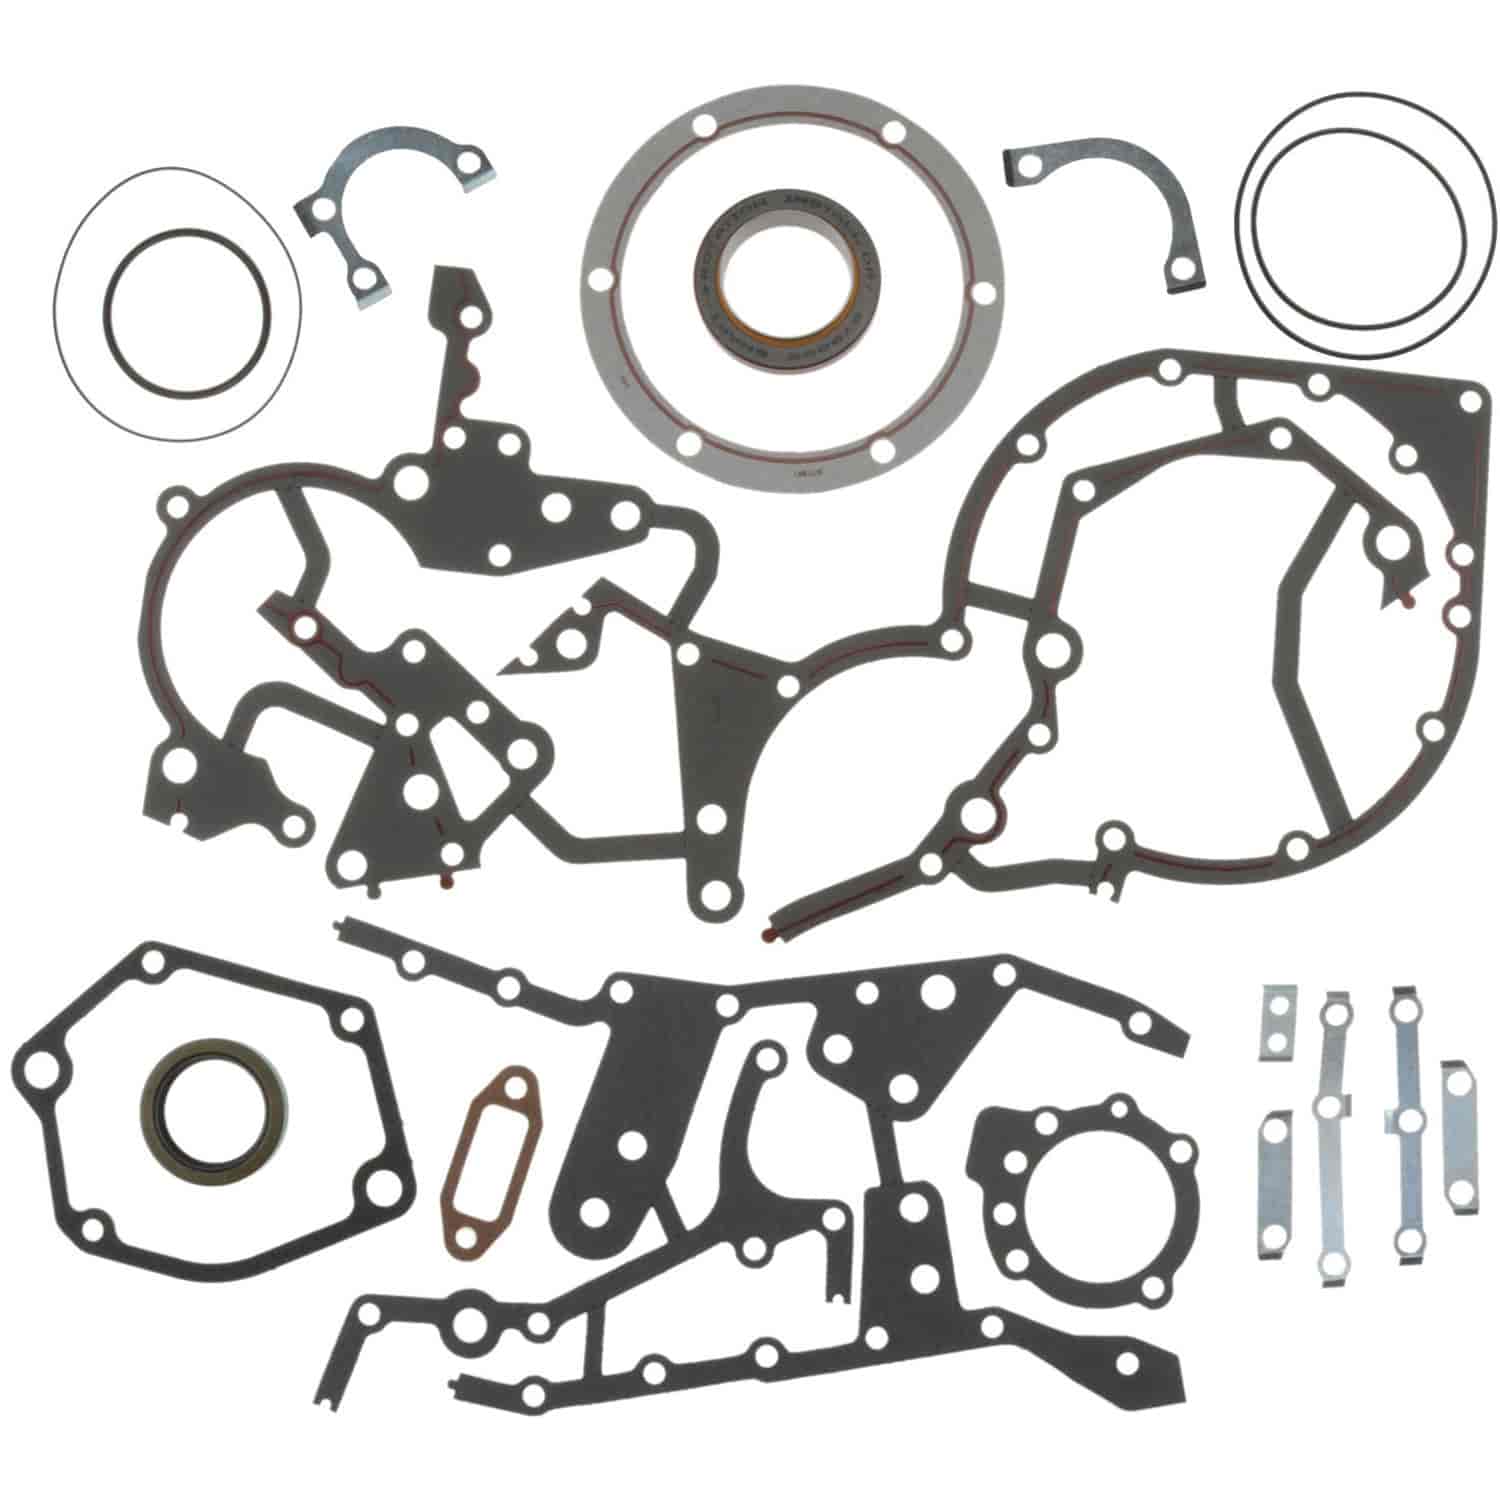 Timing Cover Set Caterpillar 3304 Engines